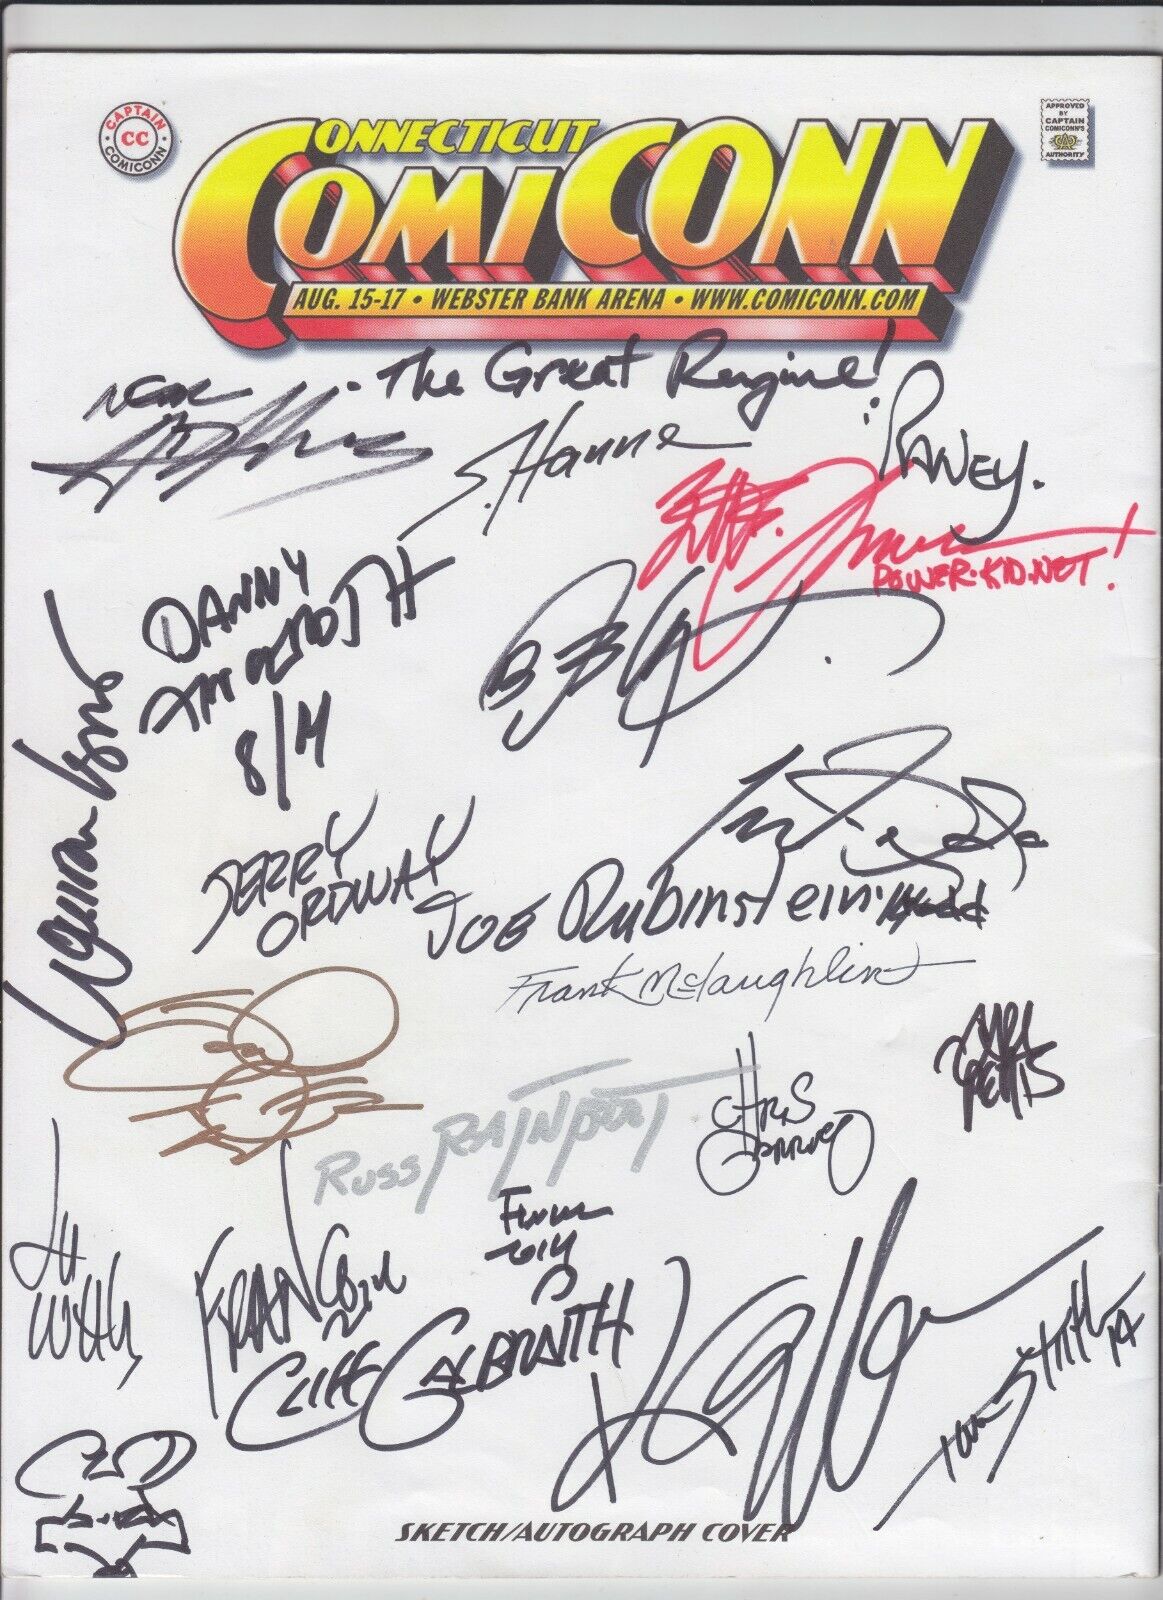 Connecticut ComiCONN 2014 Program Guide - signed Neal Adams Jerry Ordway Franco